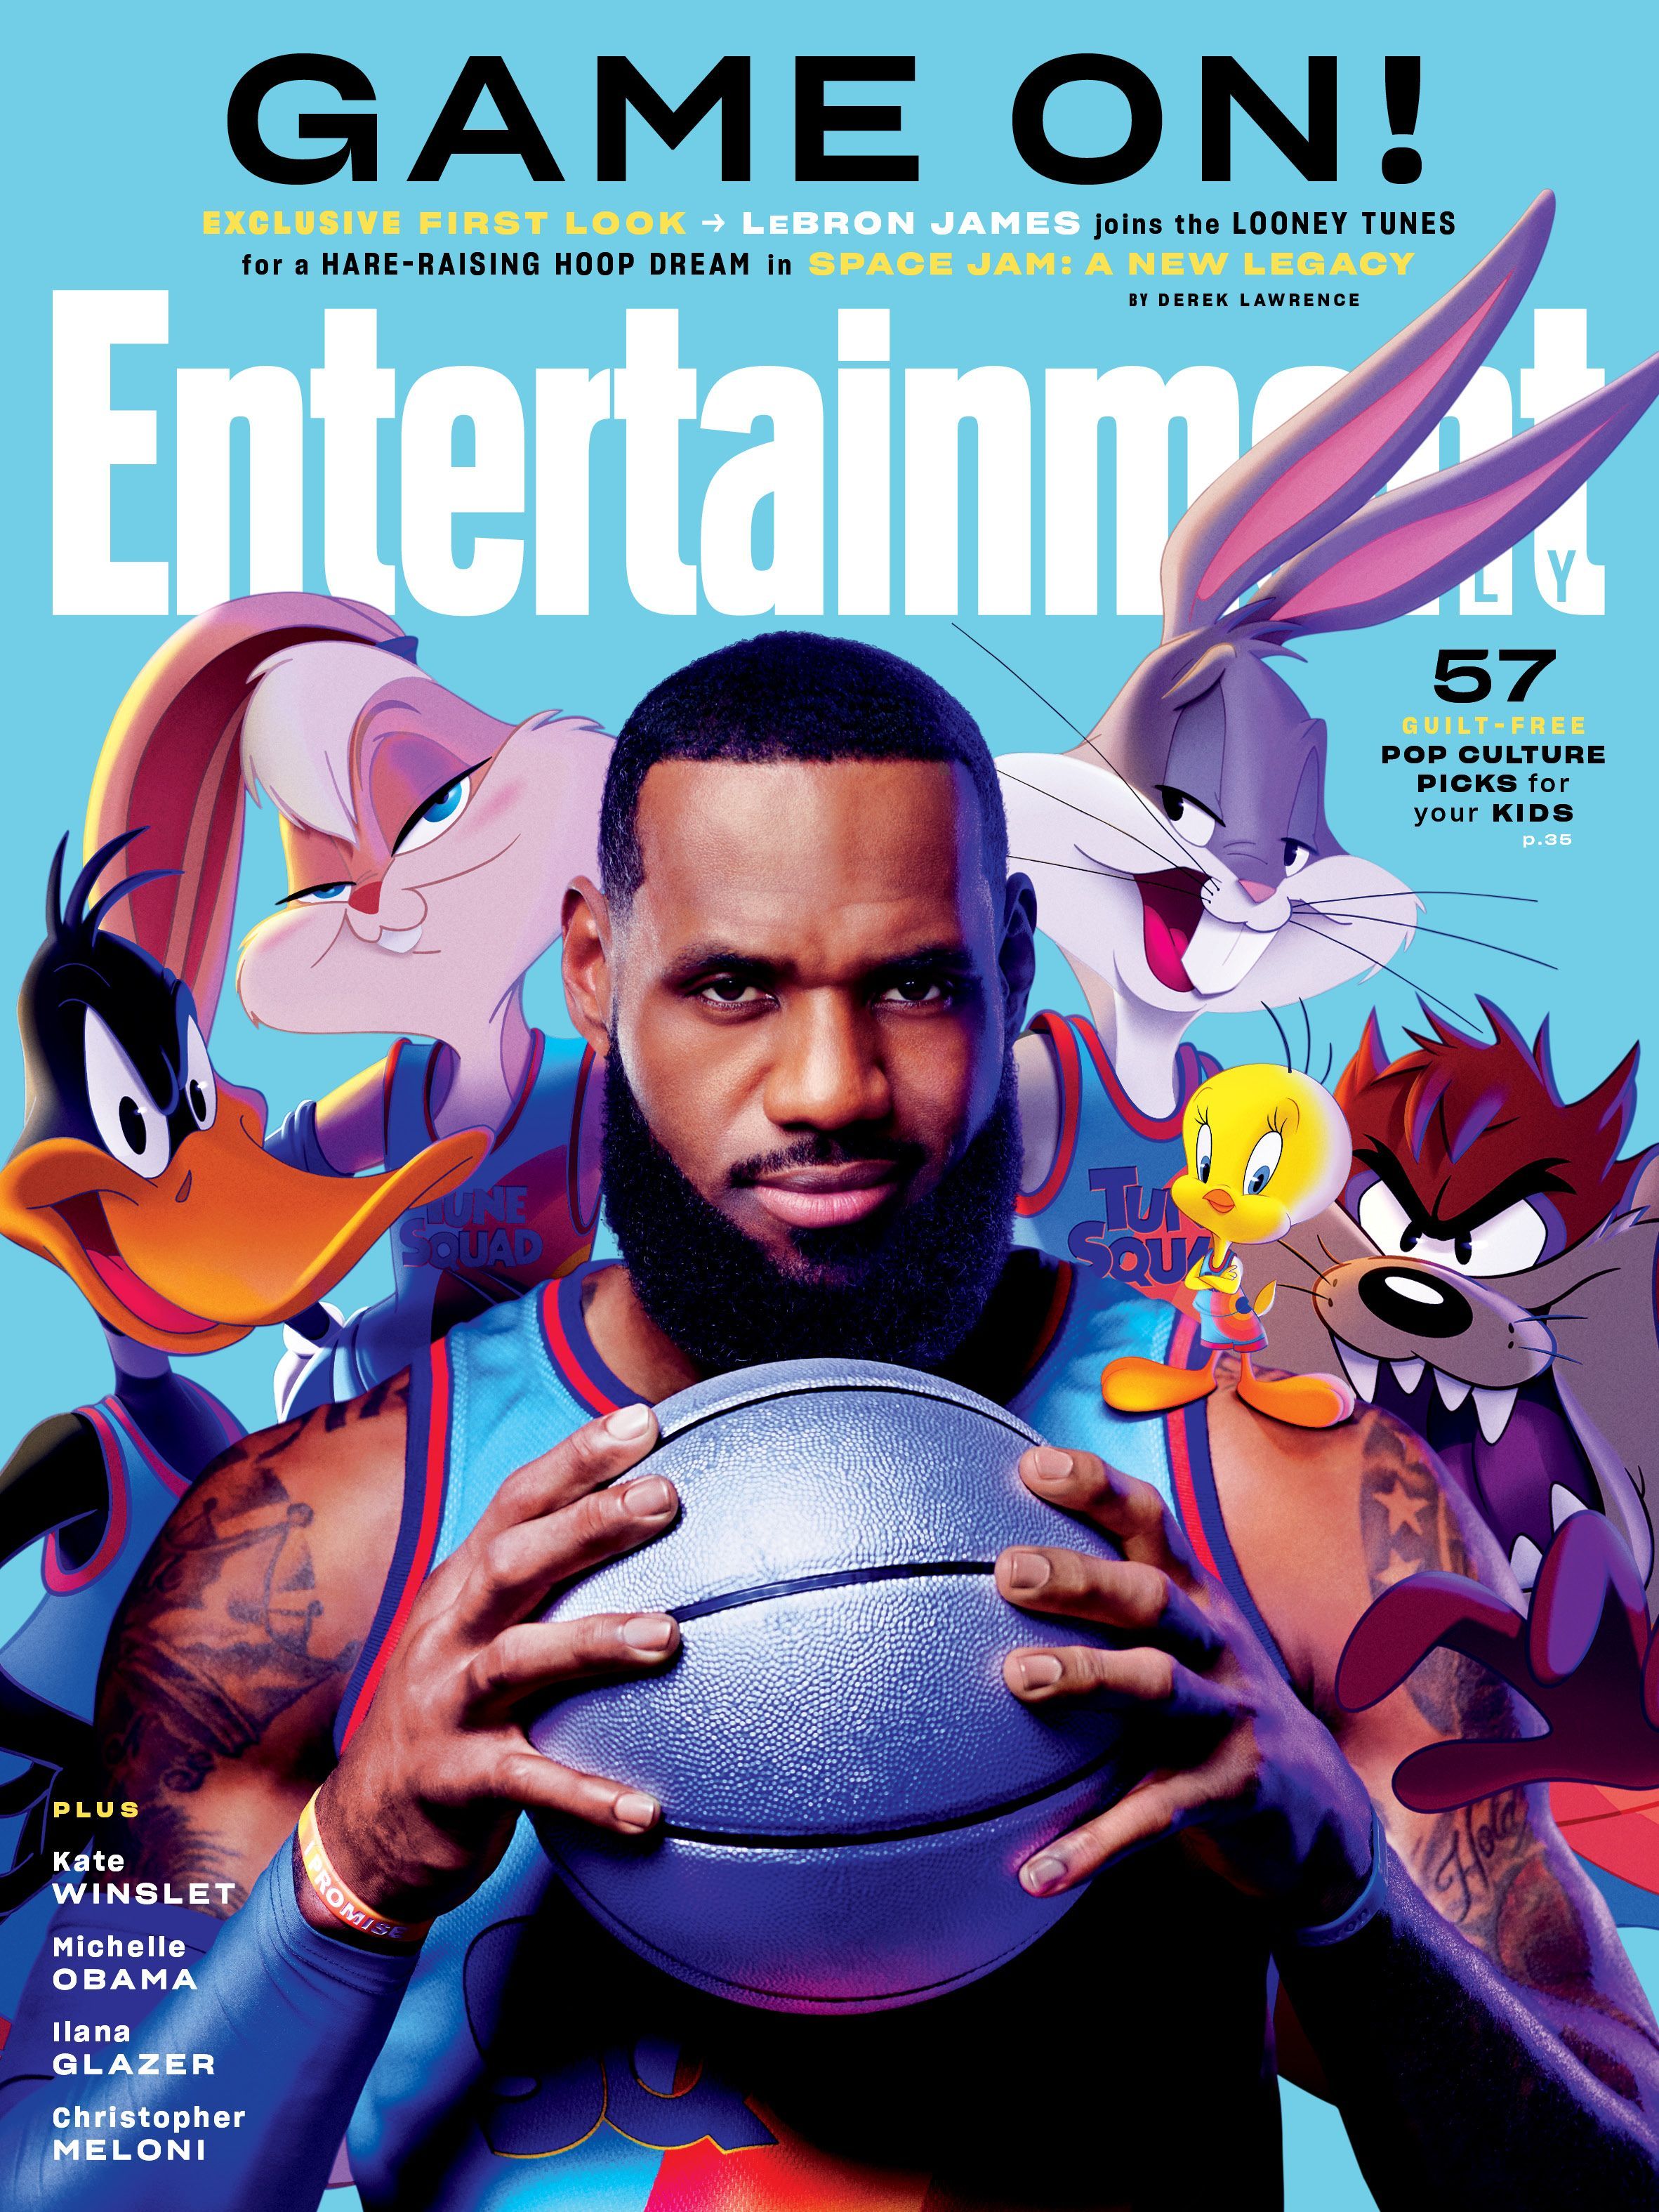 LeBron James joins the Tune Squad in 'Space Jam: A New Legacy' first look. Lebron james, Space jam, Lebron